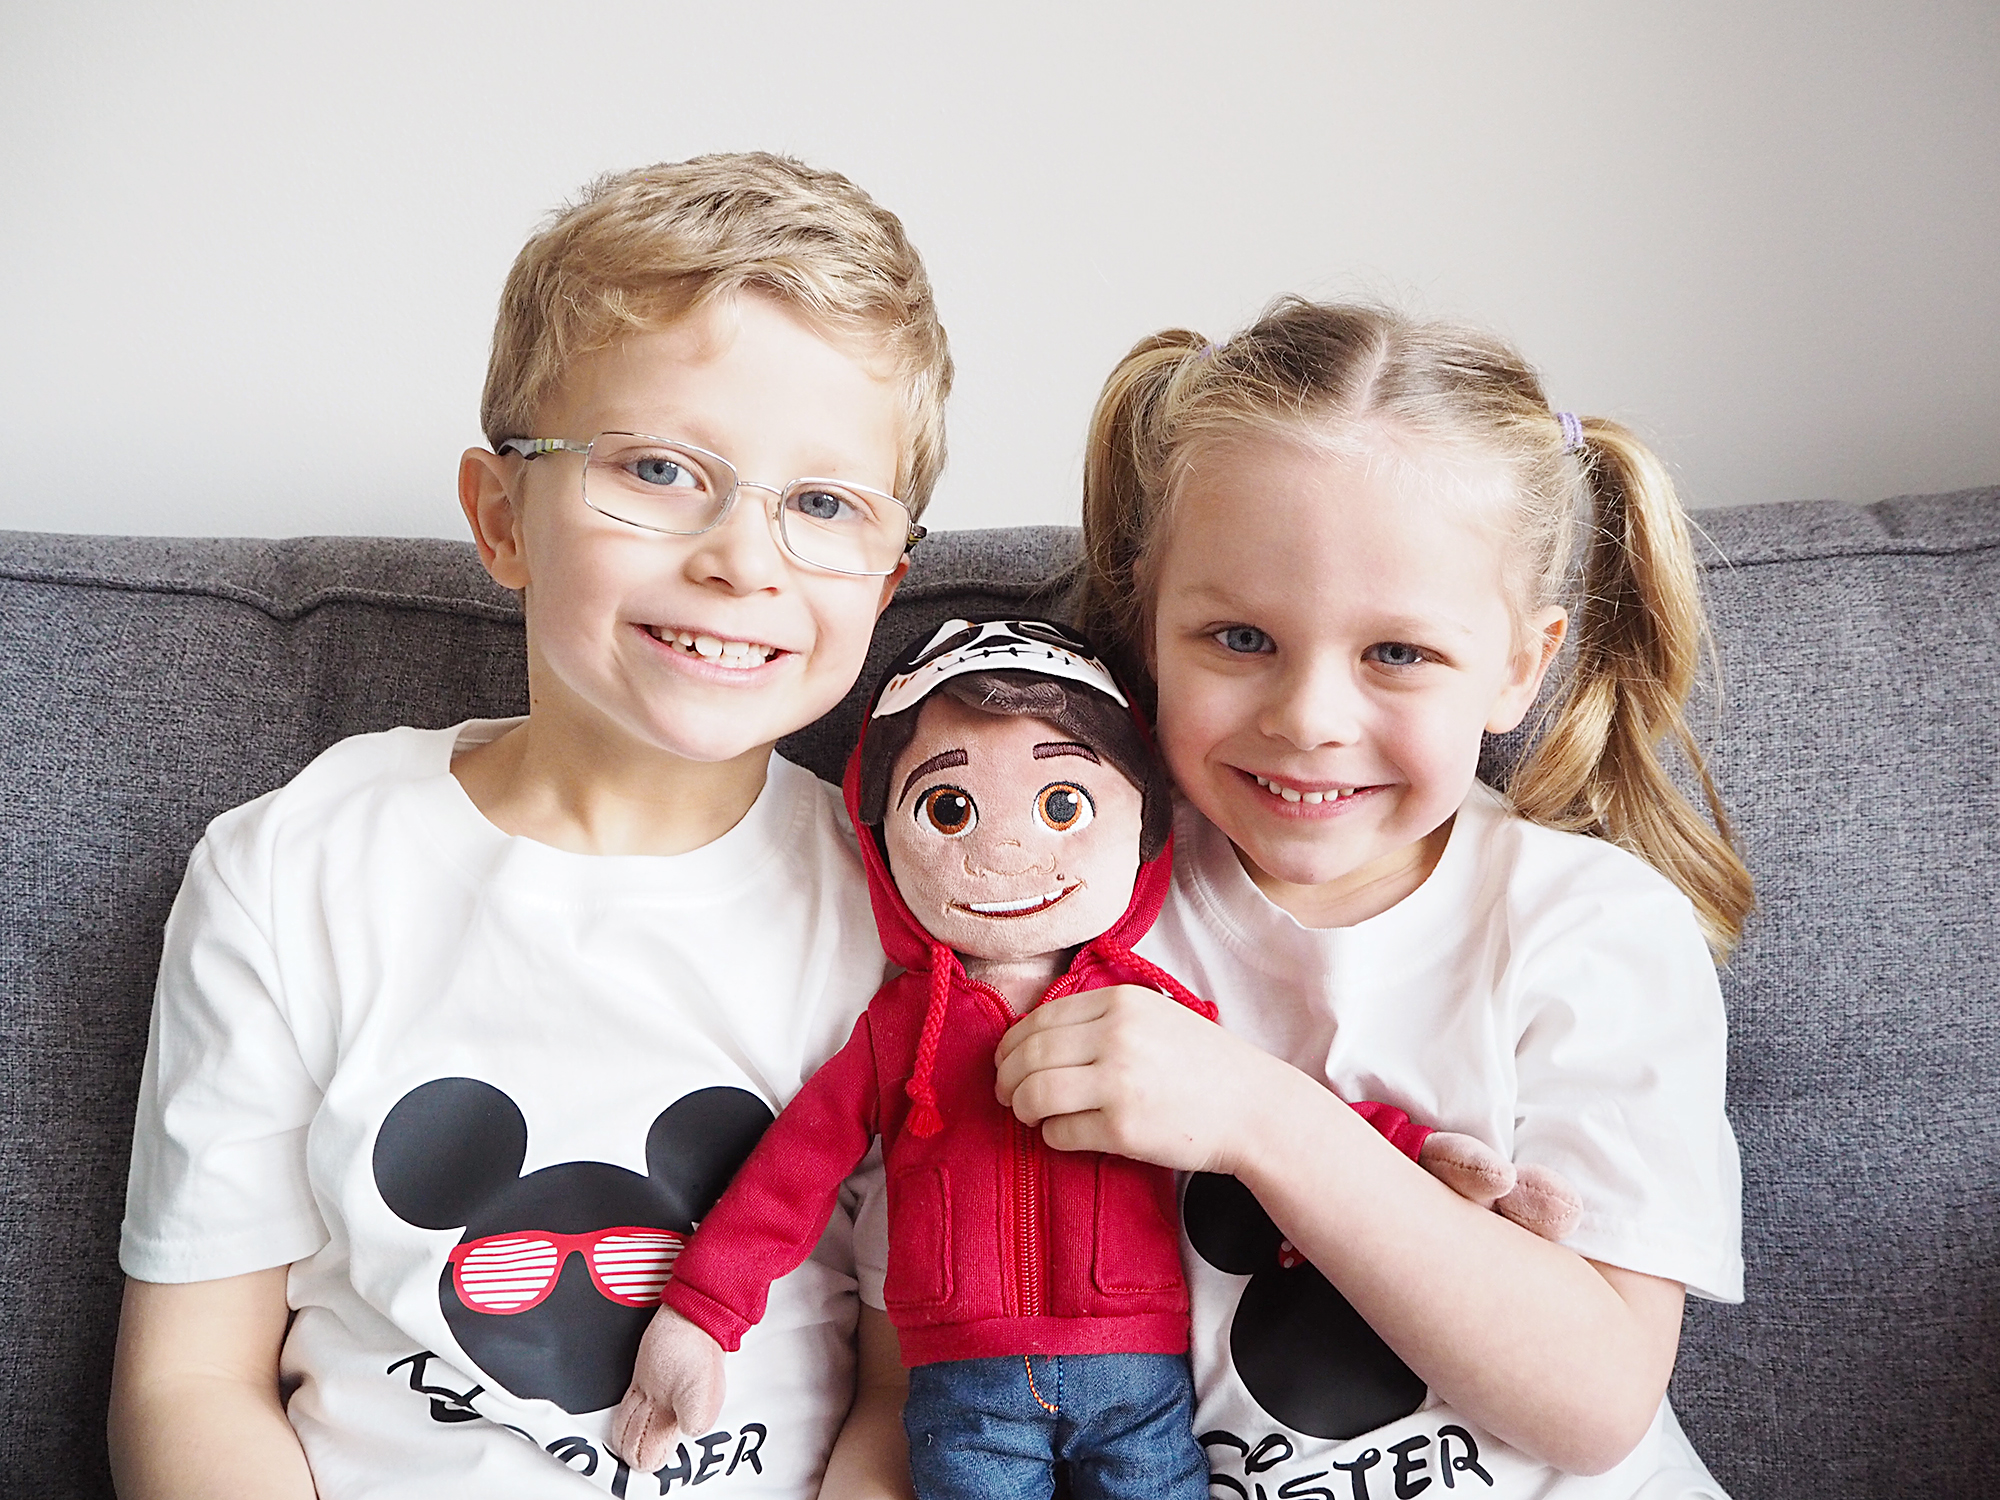 February Siblings Project Disney Pixar Coco character toys giveaway